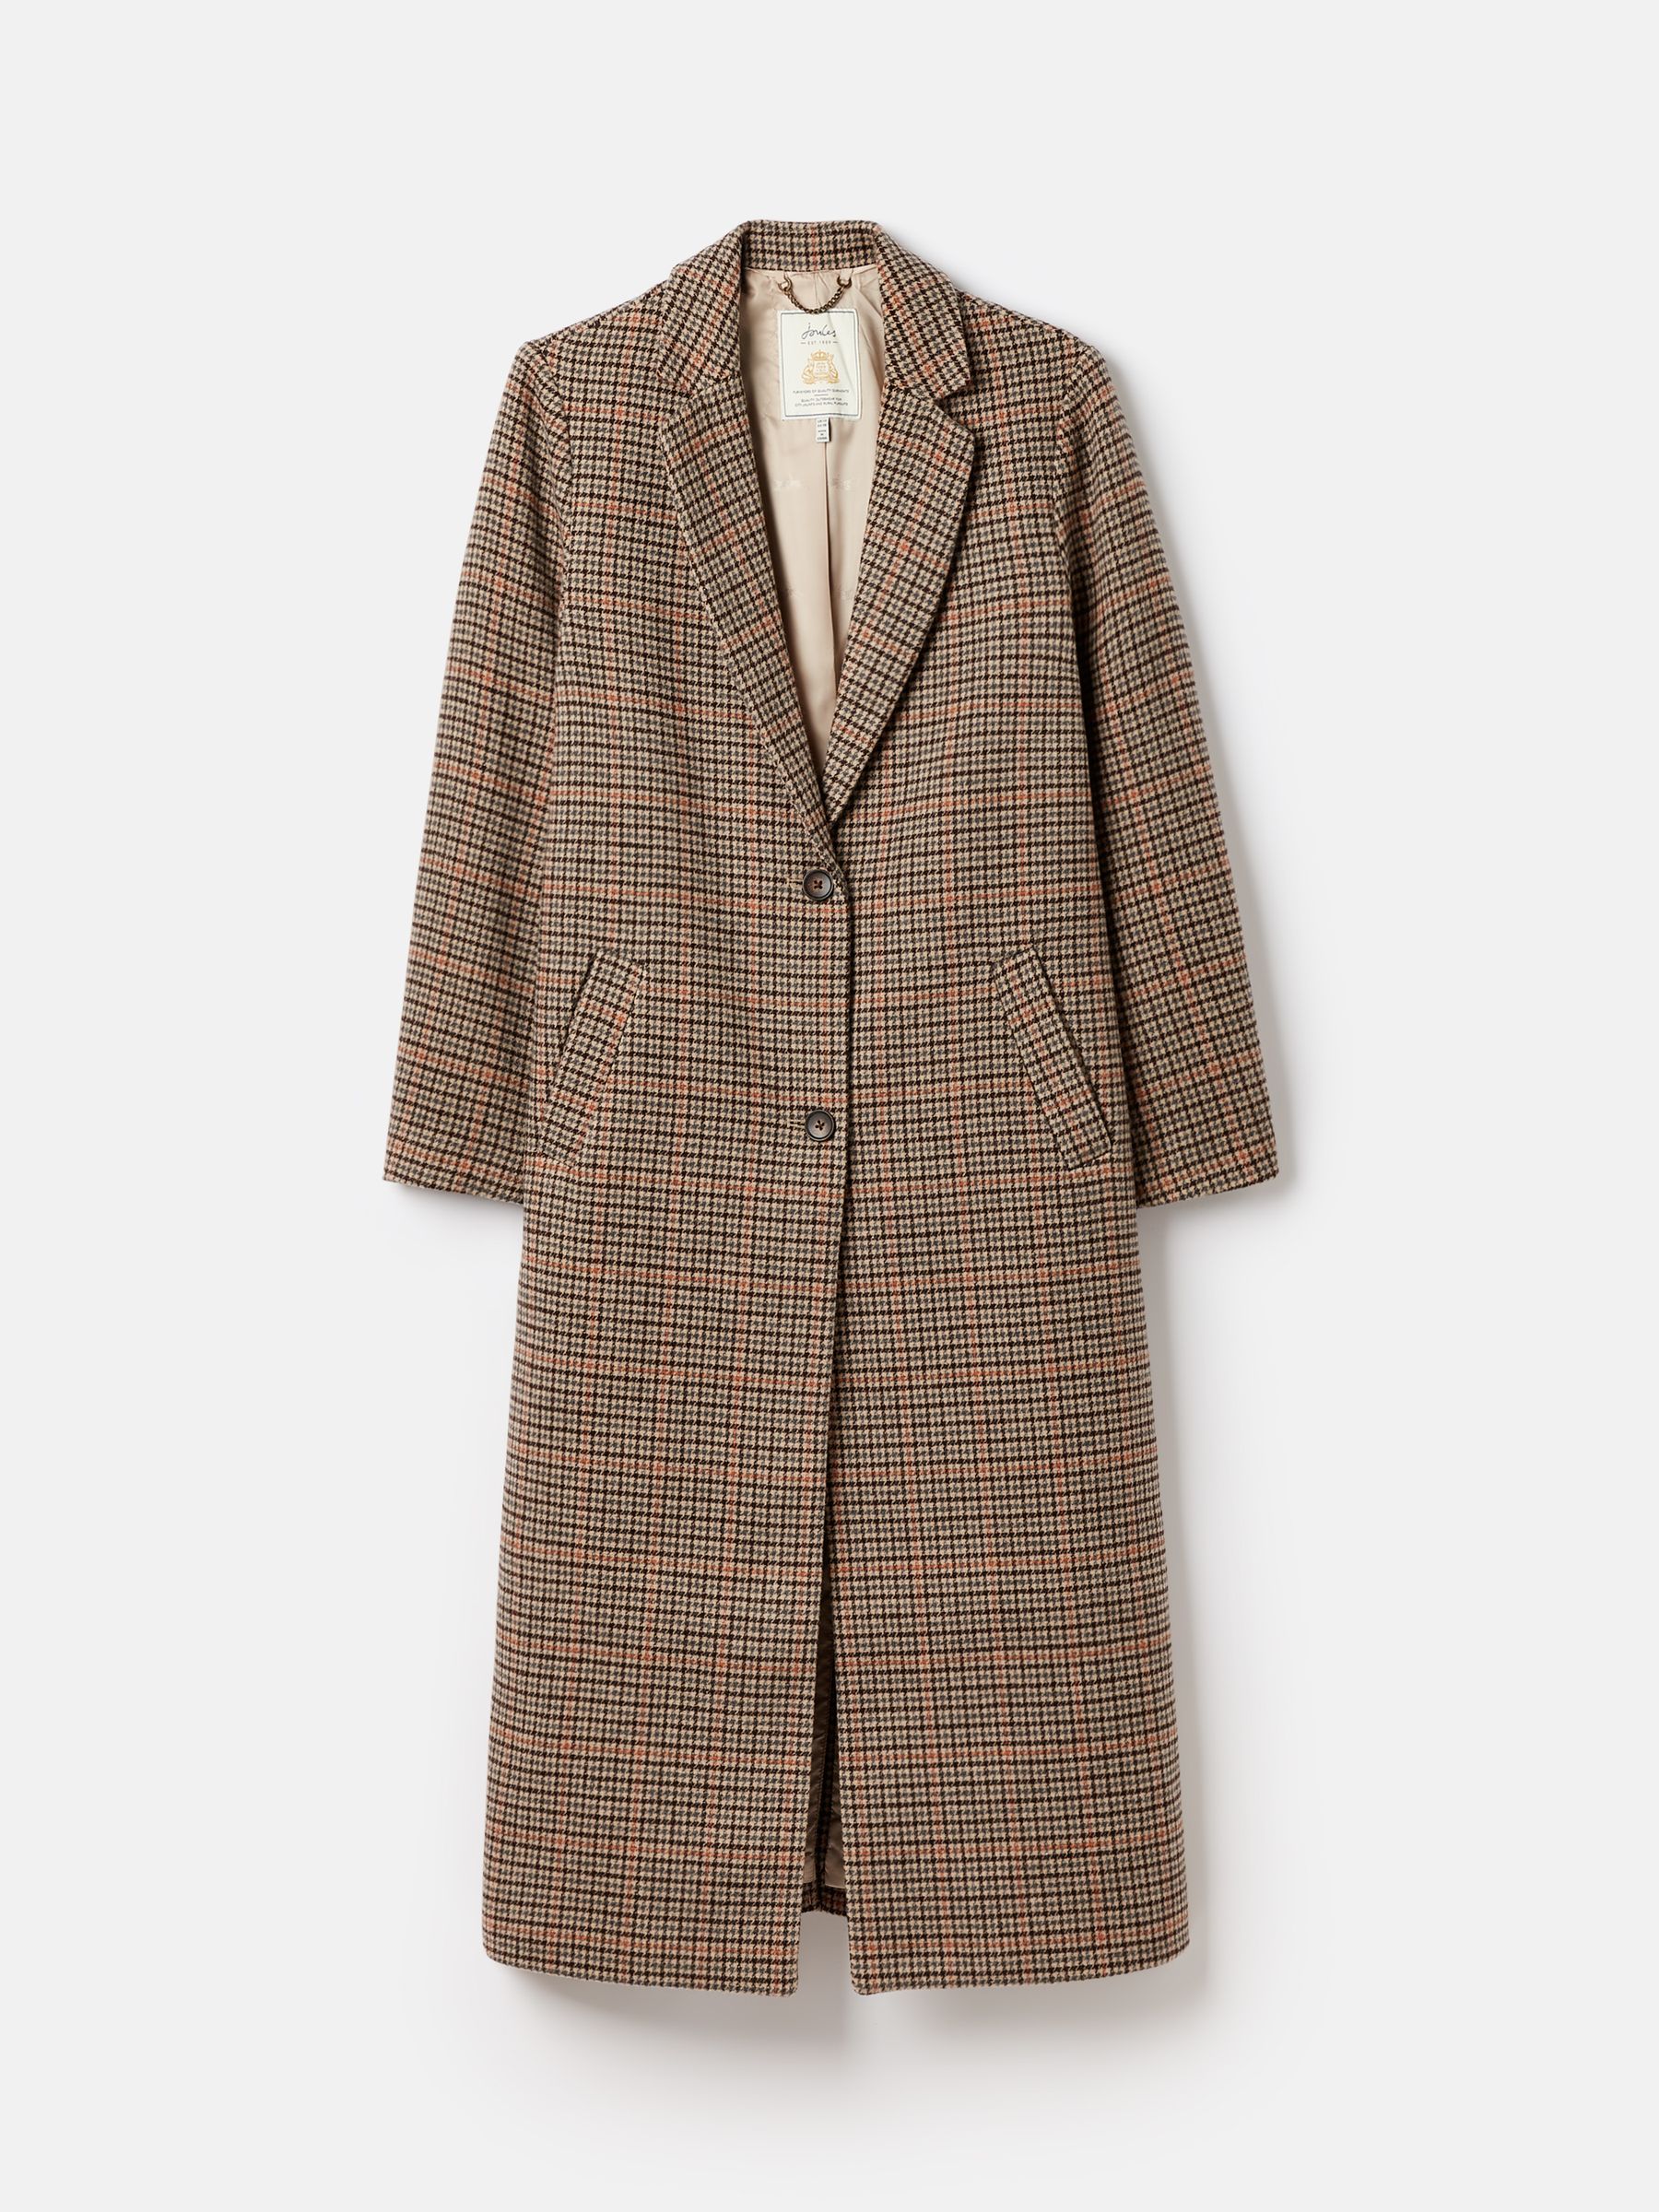 Buy Harrow Check Wool Blend Coat from the Joules online shop